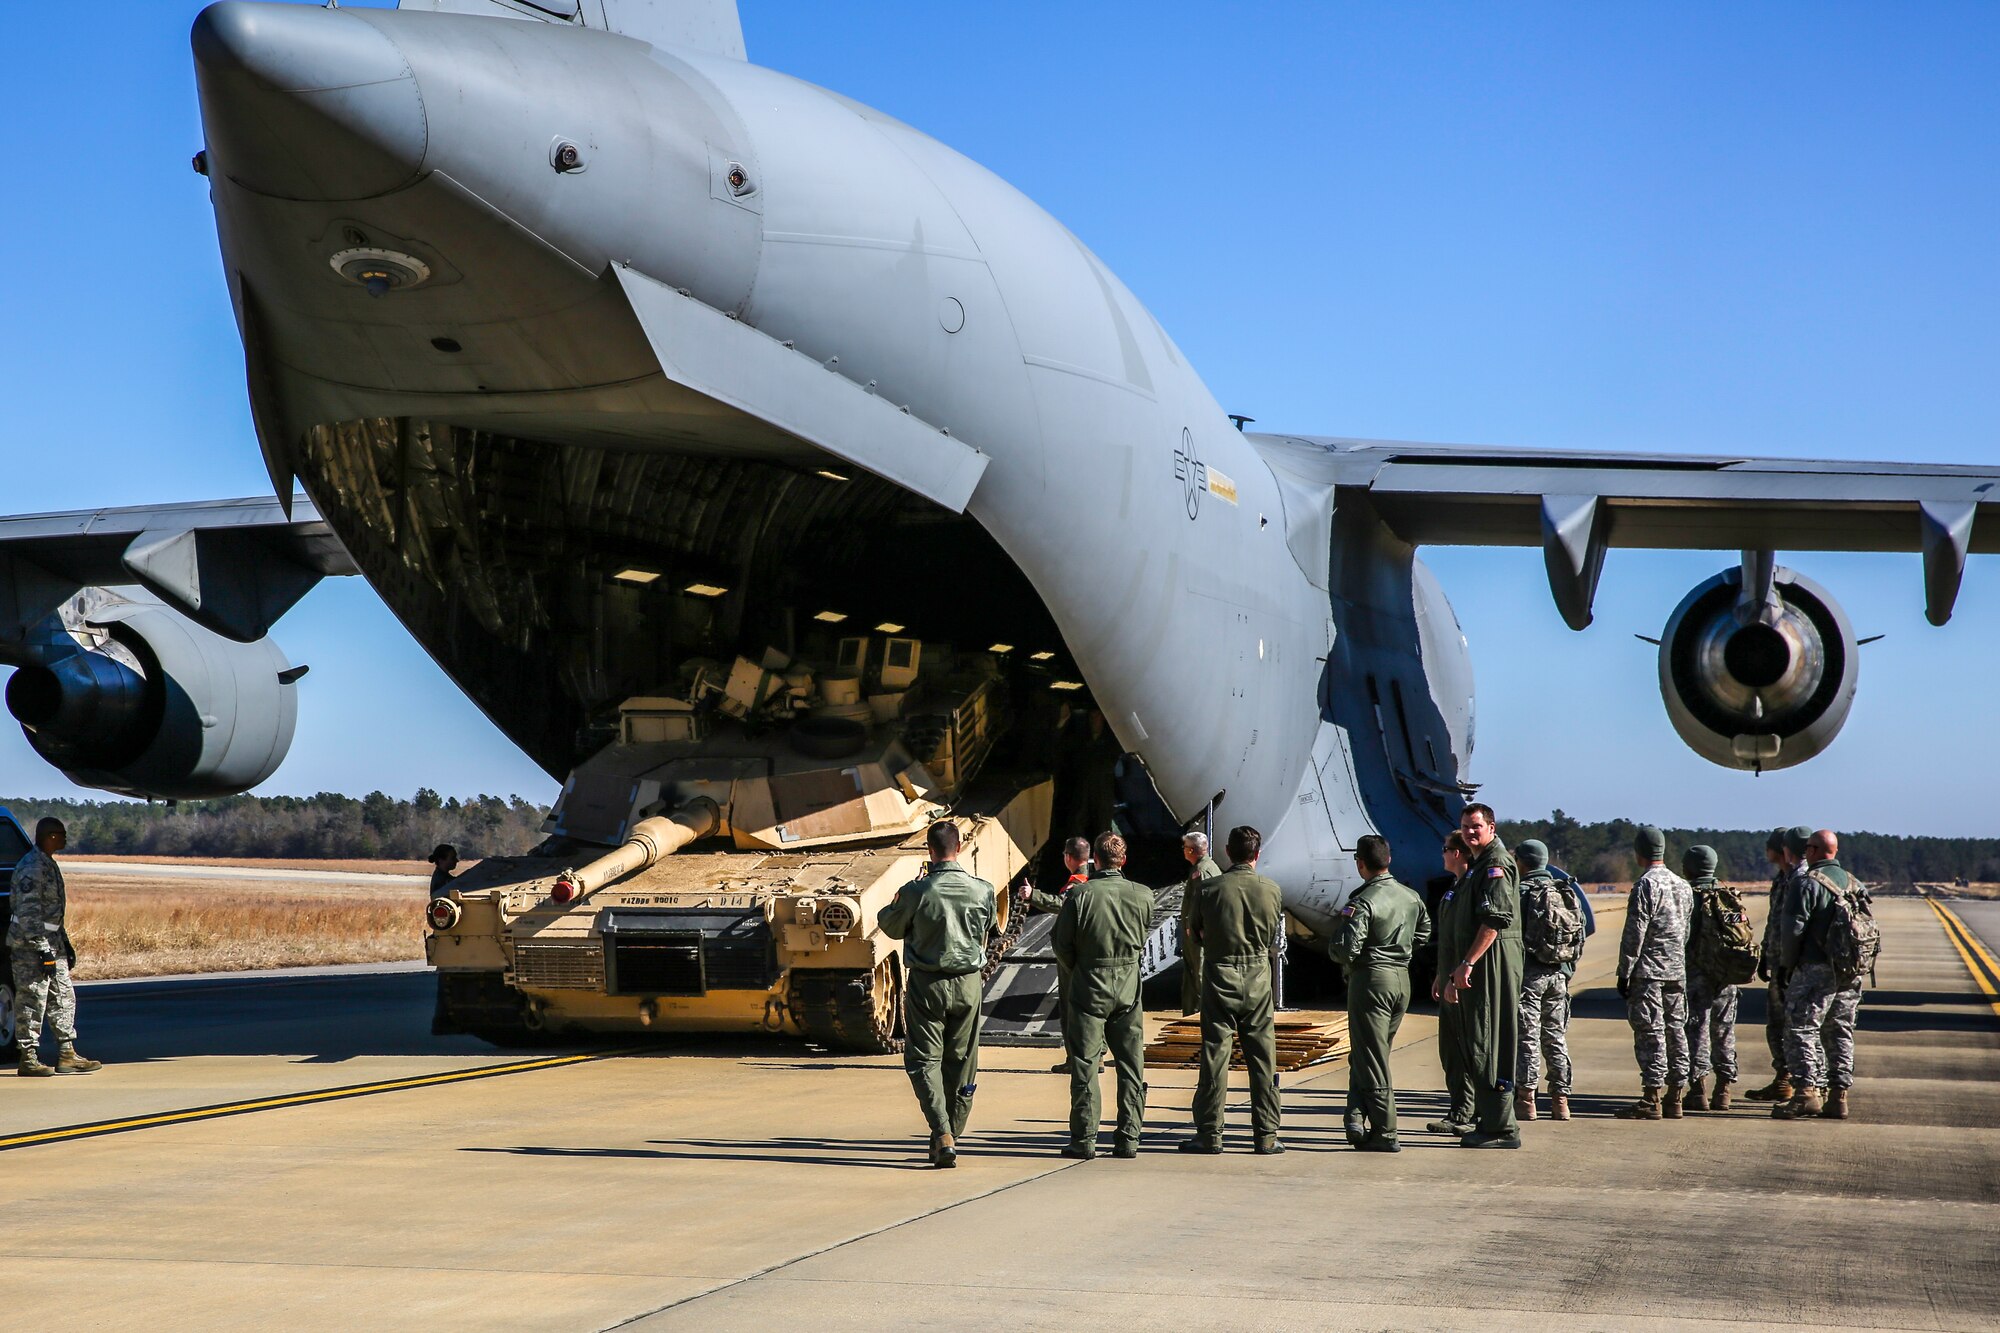 An Abrams M1A2 tank drives down the ramp of a C-17 Globemaster III Dec. 11, 2014 at North Air Force Auxiliary Field in North, S.C. Dec. 11, 2014. The tank movement was part of a two-day exercise which integrated C-17 air and ground crew training for 315th Airlift Wing Airmen stationed at Joint Base Charleston, S.C. as well as Soldiers from one of the 3rd Infantry Division’s Immediate Ready Companies stationed at Fort Stewart, Ga. Four C-17’s were used during the exercise to deploy and redeploy two Abrams M1A2 tanks, an M88 recovery vehicle and two M2A3 Bradley Fighting Vehicles. (U.S. Air Force photo by Tech. Sgt. Shane Ellis)